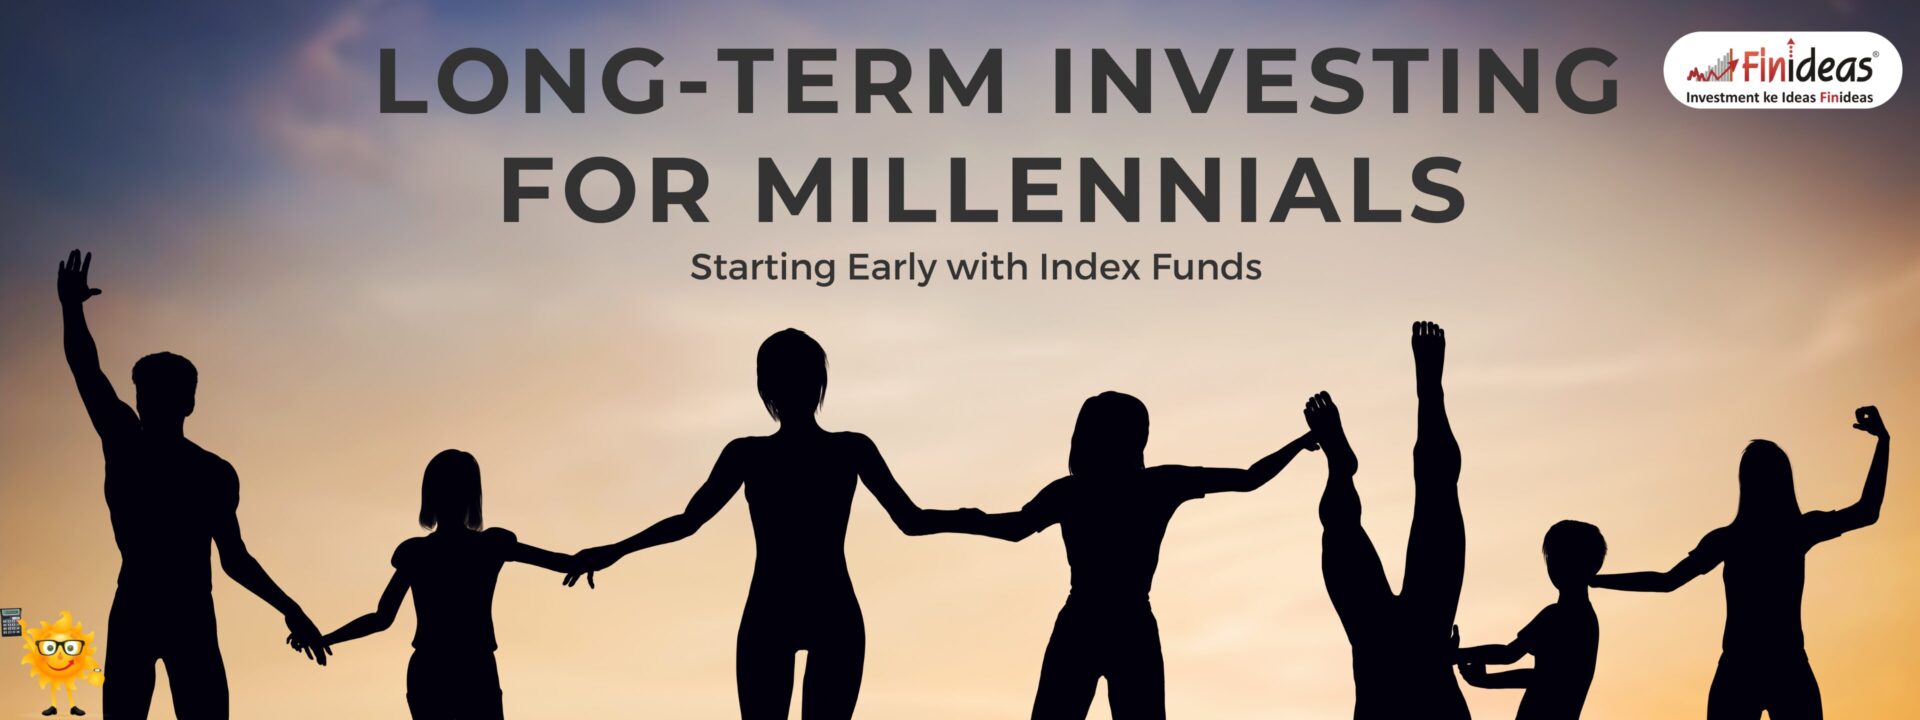 Long-Term Investing for Millennials: Starting Early with Index Funds